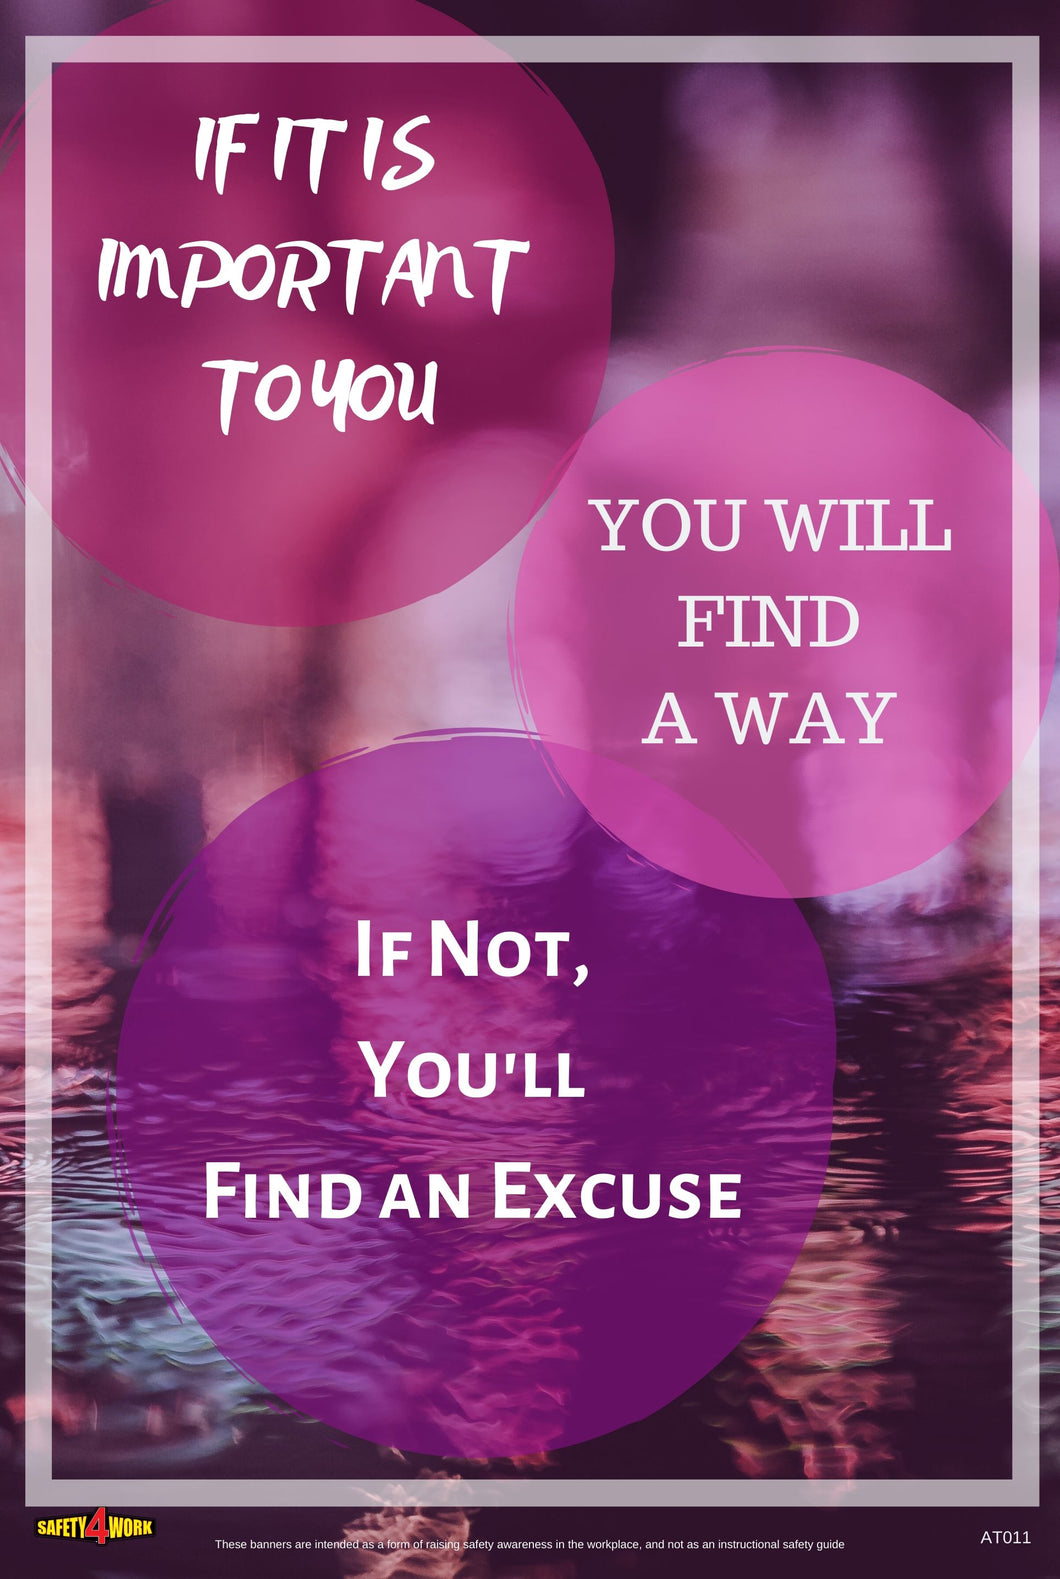 IF IT'S IMPORTANT TO YOU, YOU WILL FIND A WAY. IF NOT YOU'LL FIND AN EXCUSE, attitude workplace safety poster